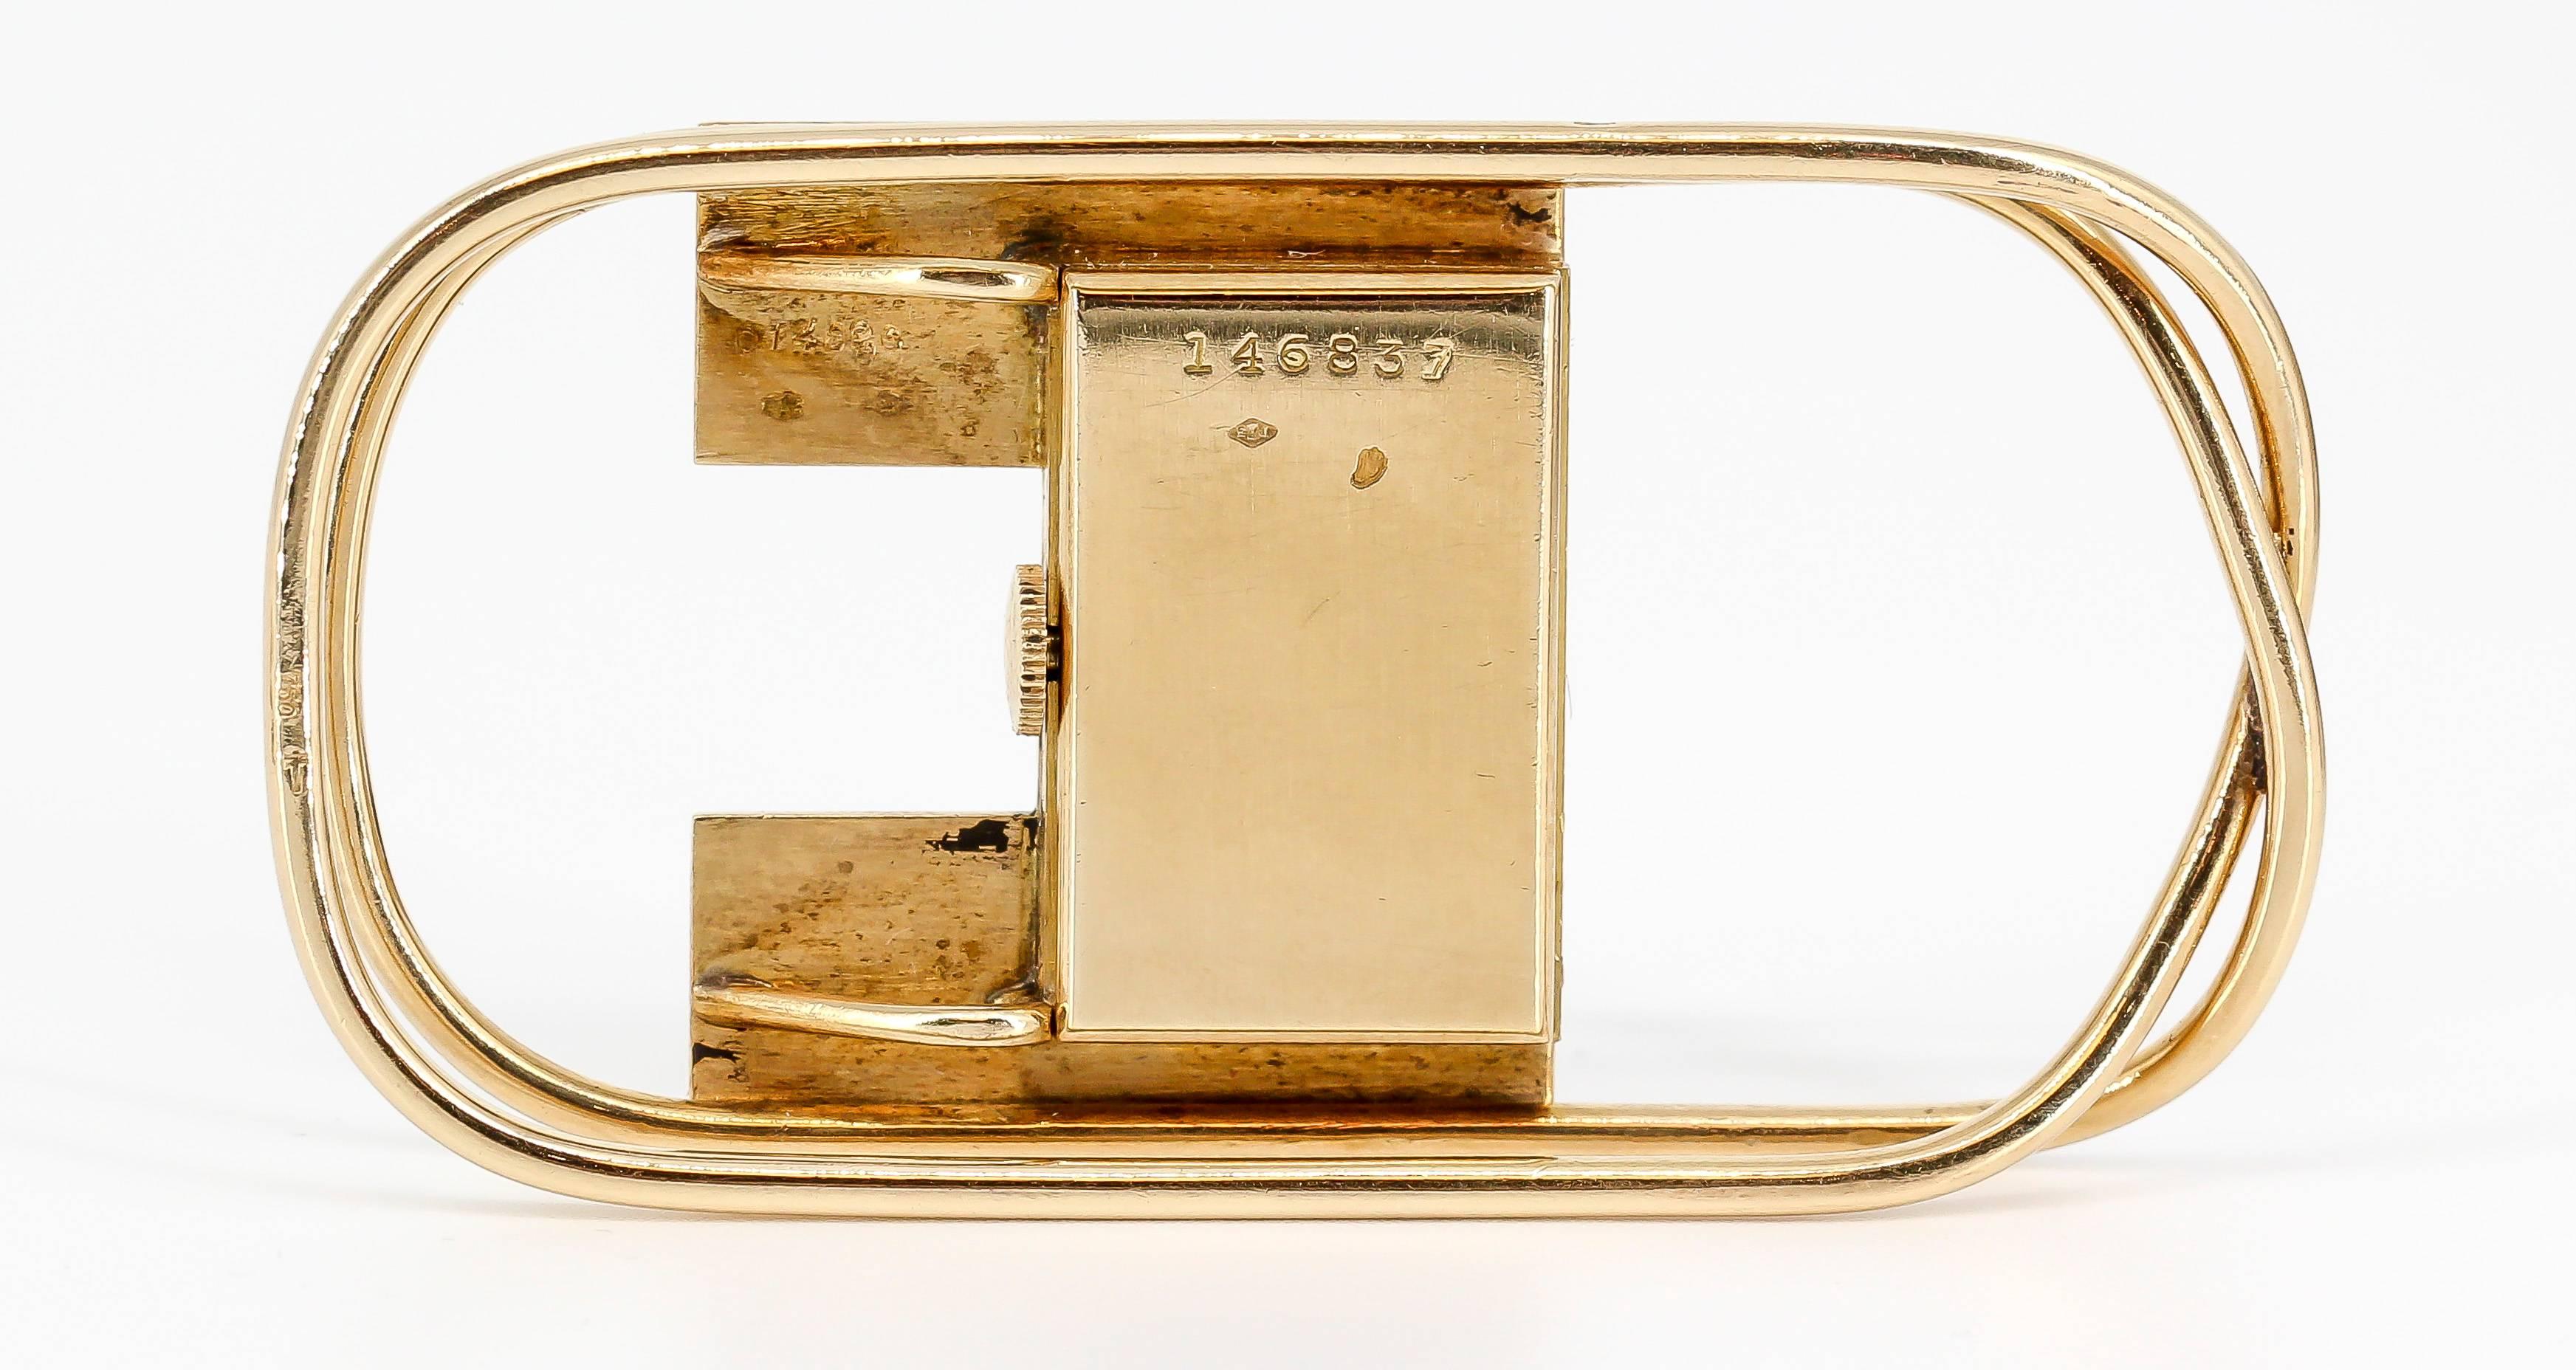 Handsome and very rare French 18K yellow gold money clip with built-in watch by Cartier, circa 1940s. It features a 1/2" diameter clock in the middle of the money clip. Manual wind mechanism by Edmond Jaeger. Expert workmanship